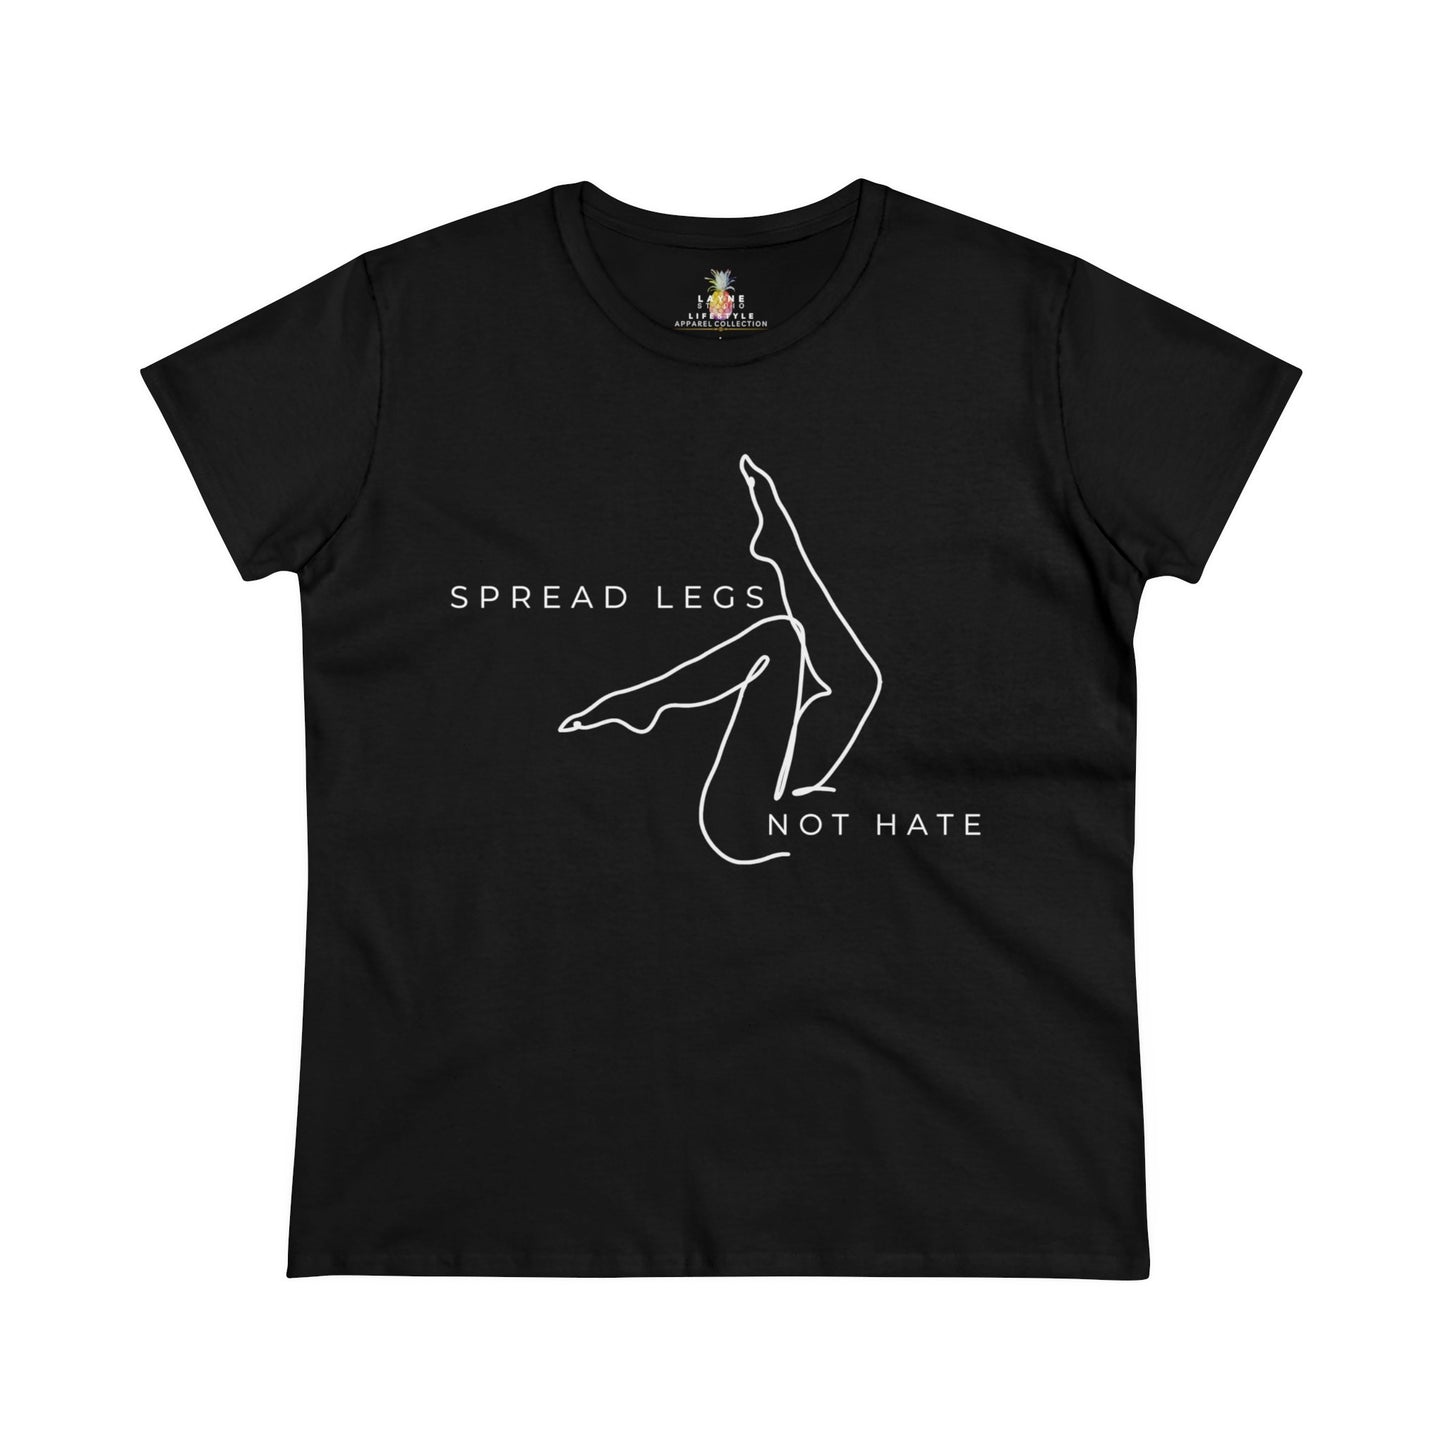 "Spread Legs, Not Hate" Graphic Women's Midweight Cotton Tee